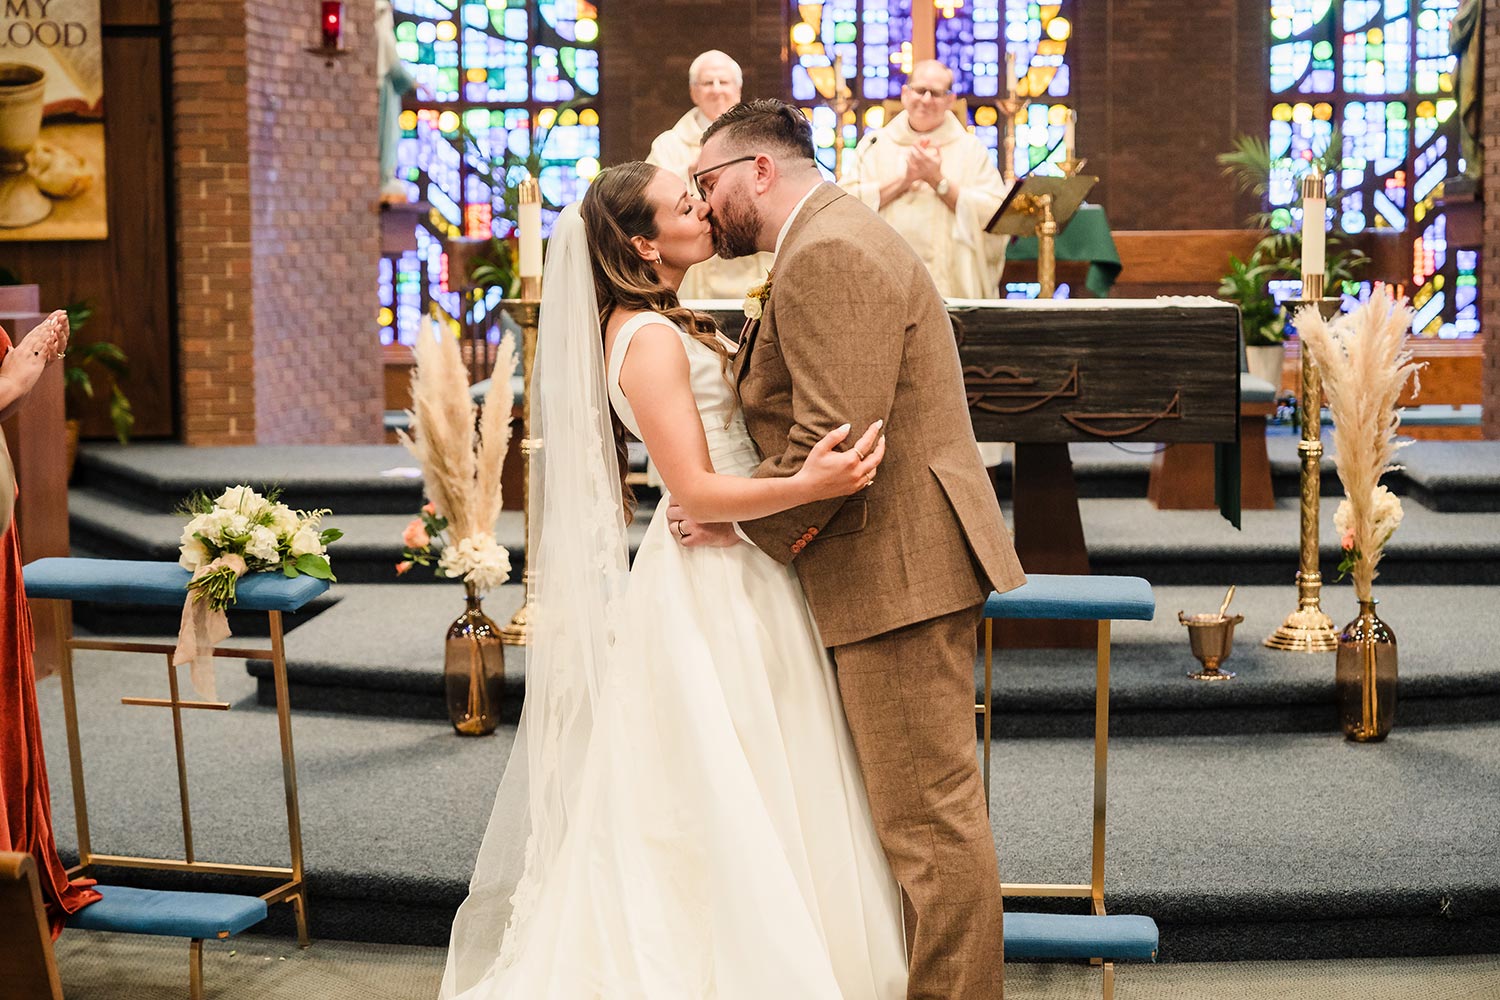 Bride and groom kiss during their wedding ceremony at Our Lady of Peace Catholic Church in Darien, IL